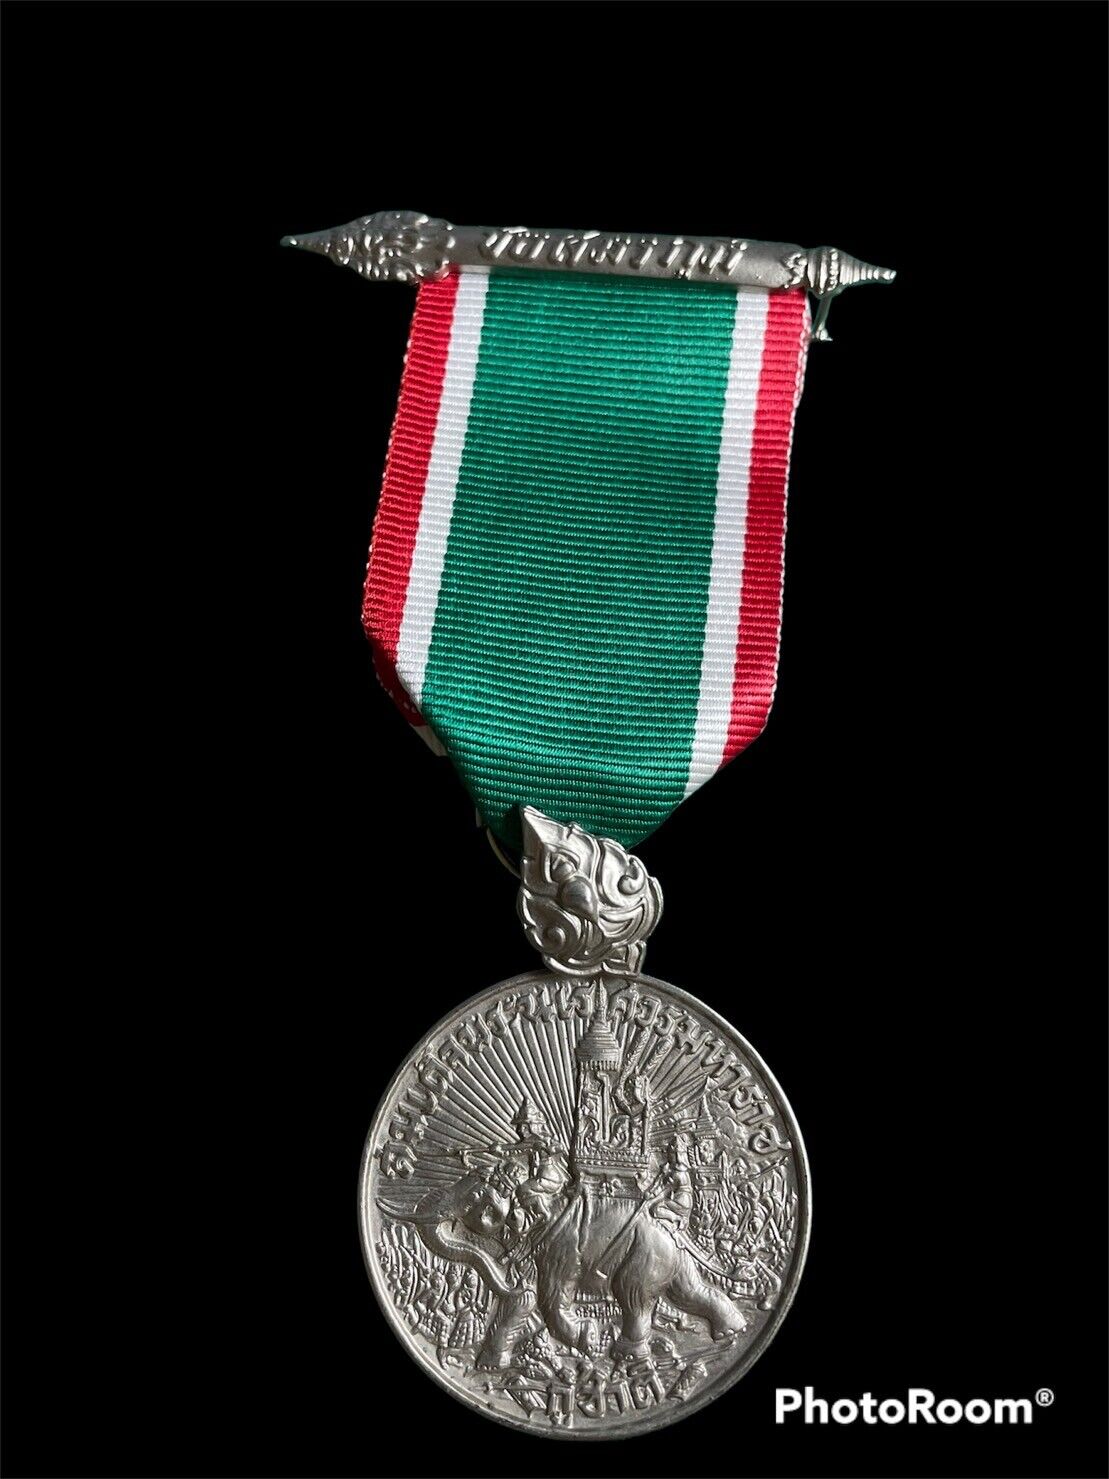 THAILAND VICTORY MEDAL DURING THE GREAT EAST ASIA WAR (WWII)